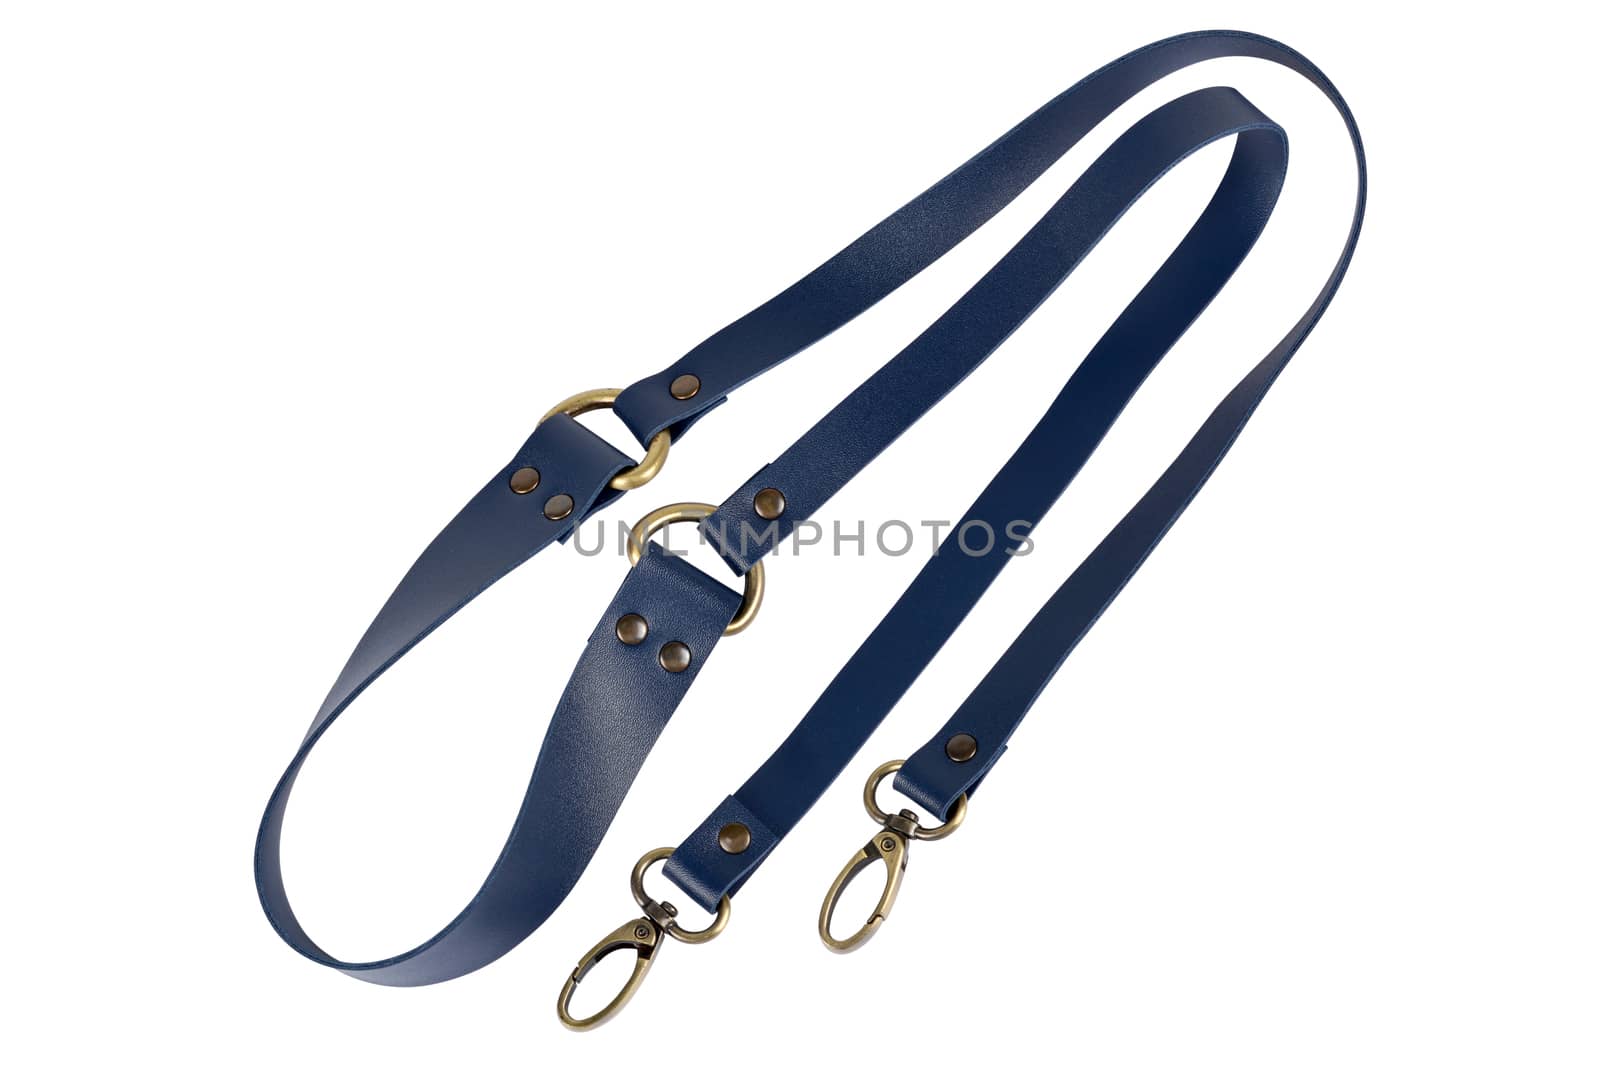 blue leather belt with carbine and metal accessories isolated on white background. use for bags and suitcases